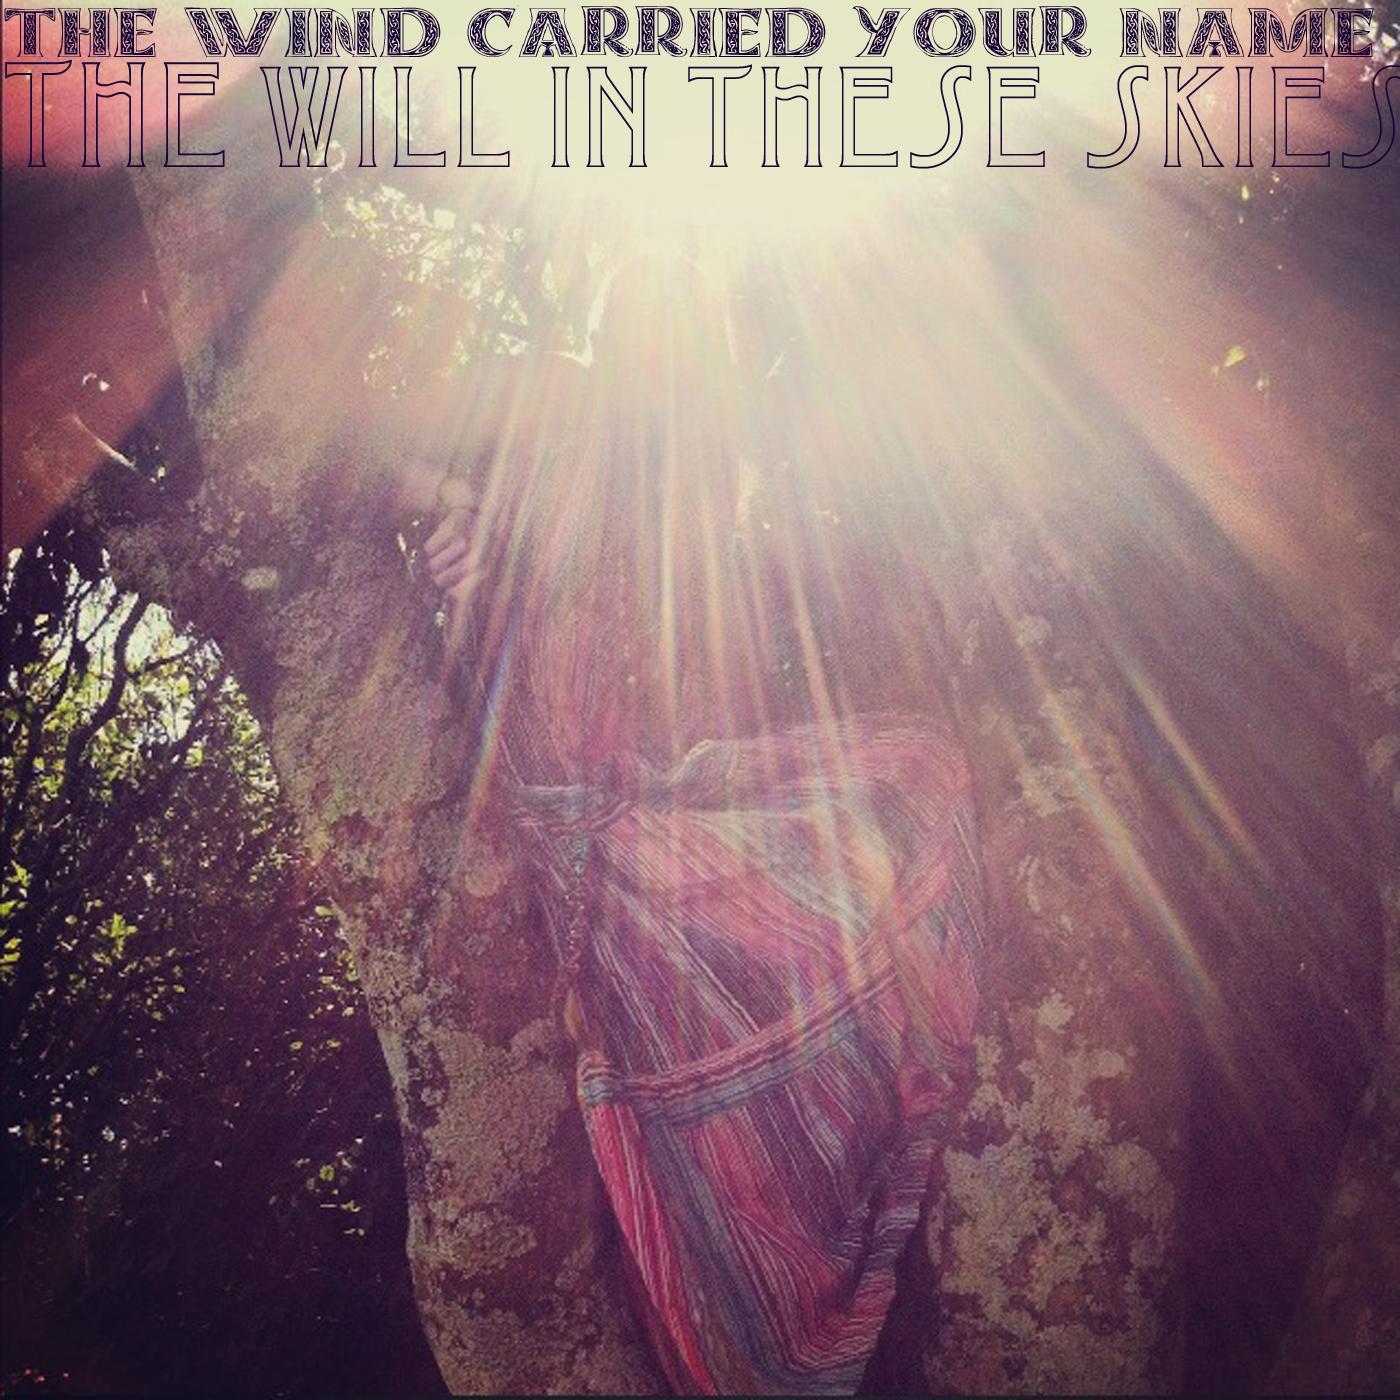 The wind Carried Your Name